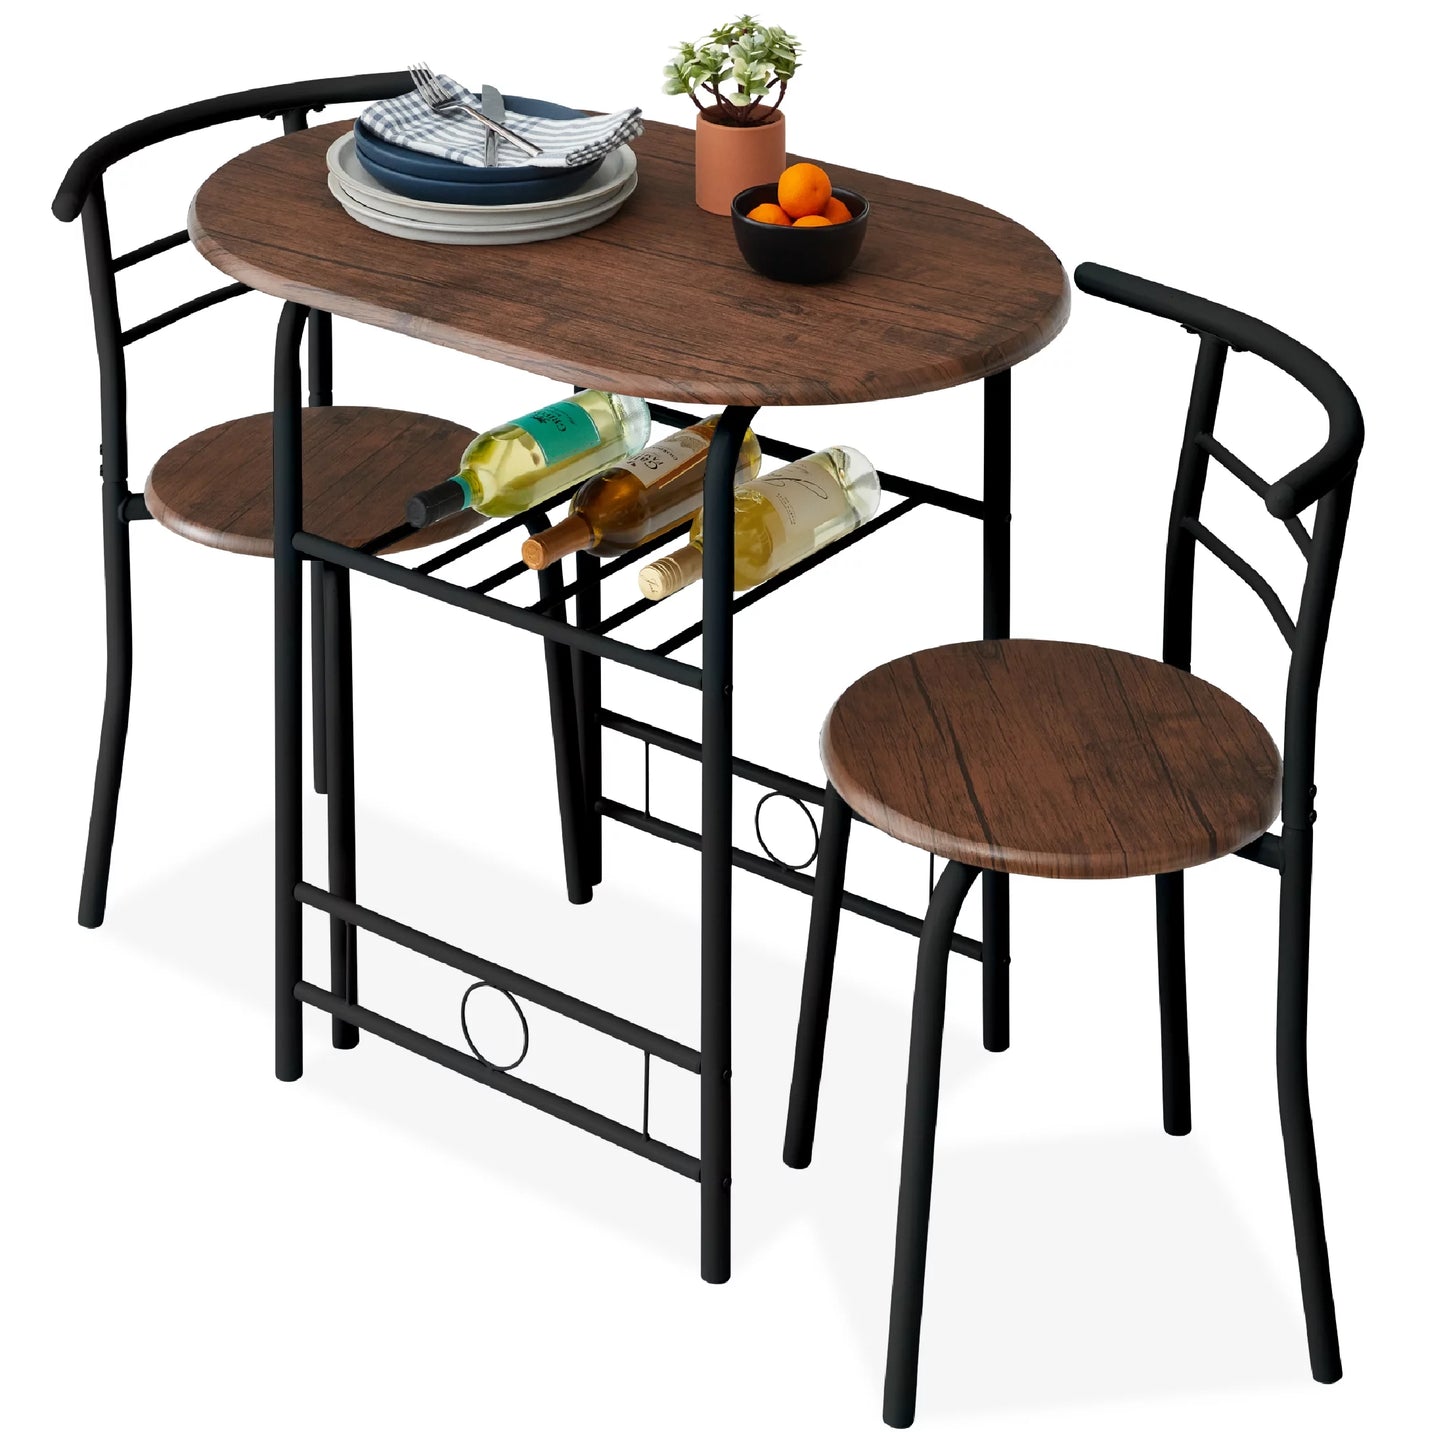 Best Choice Products 3-Piece Wood Dining Room Round Table & Chairs Set w/ Steel Frame, Built-In Wine Rack - Black/Brown